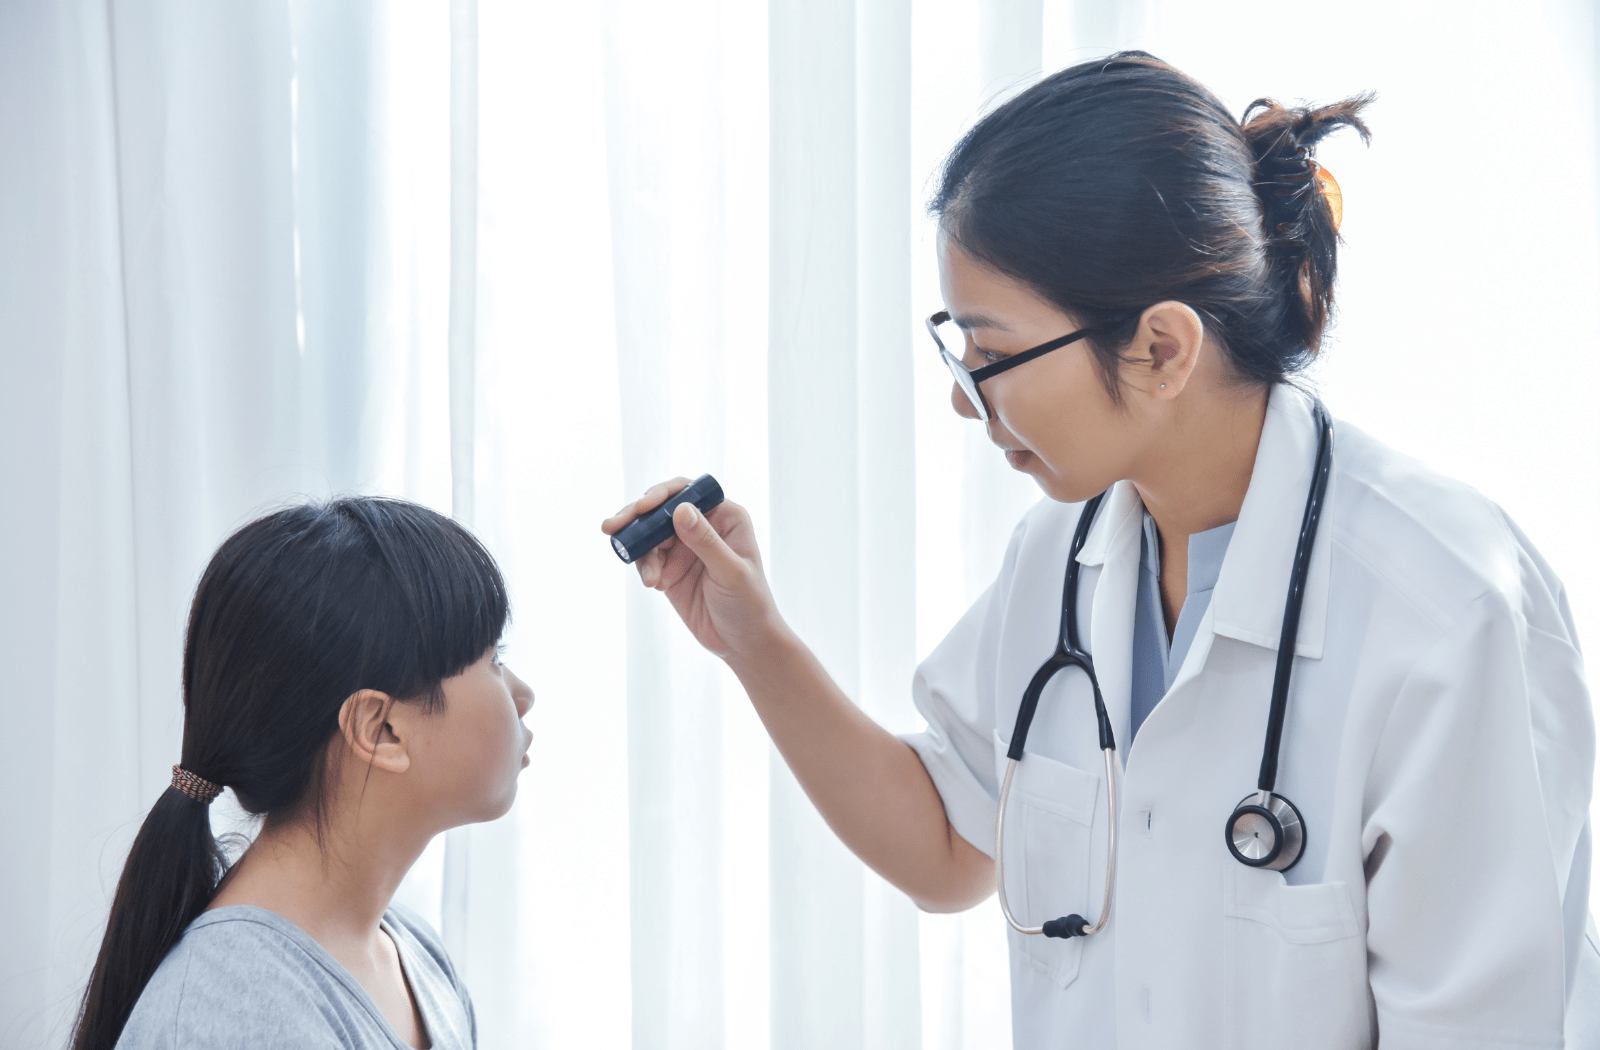 A female optometrist using a light to look into a young girl's eyes